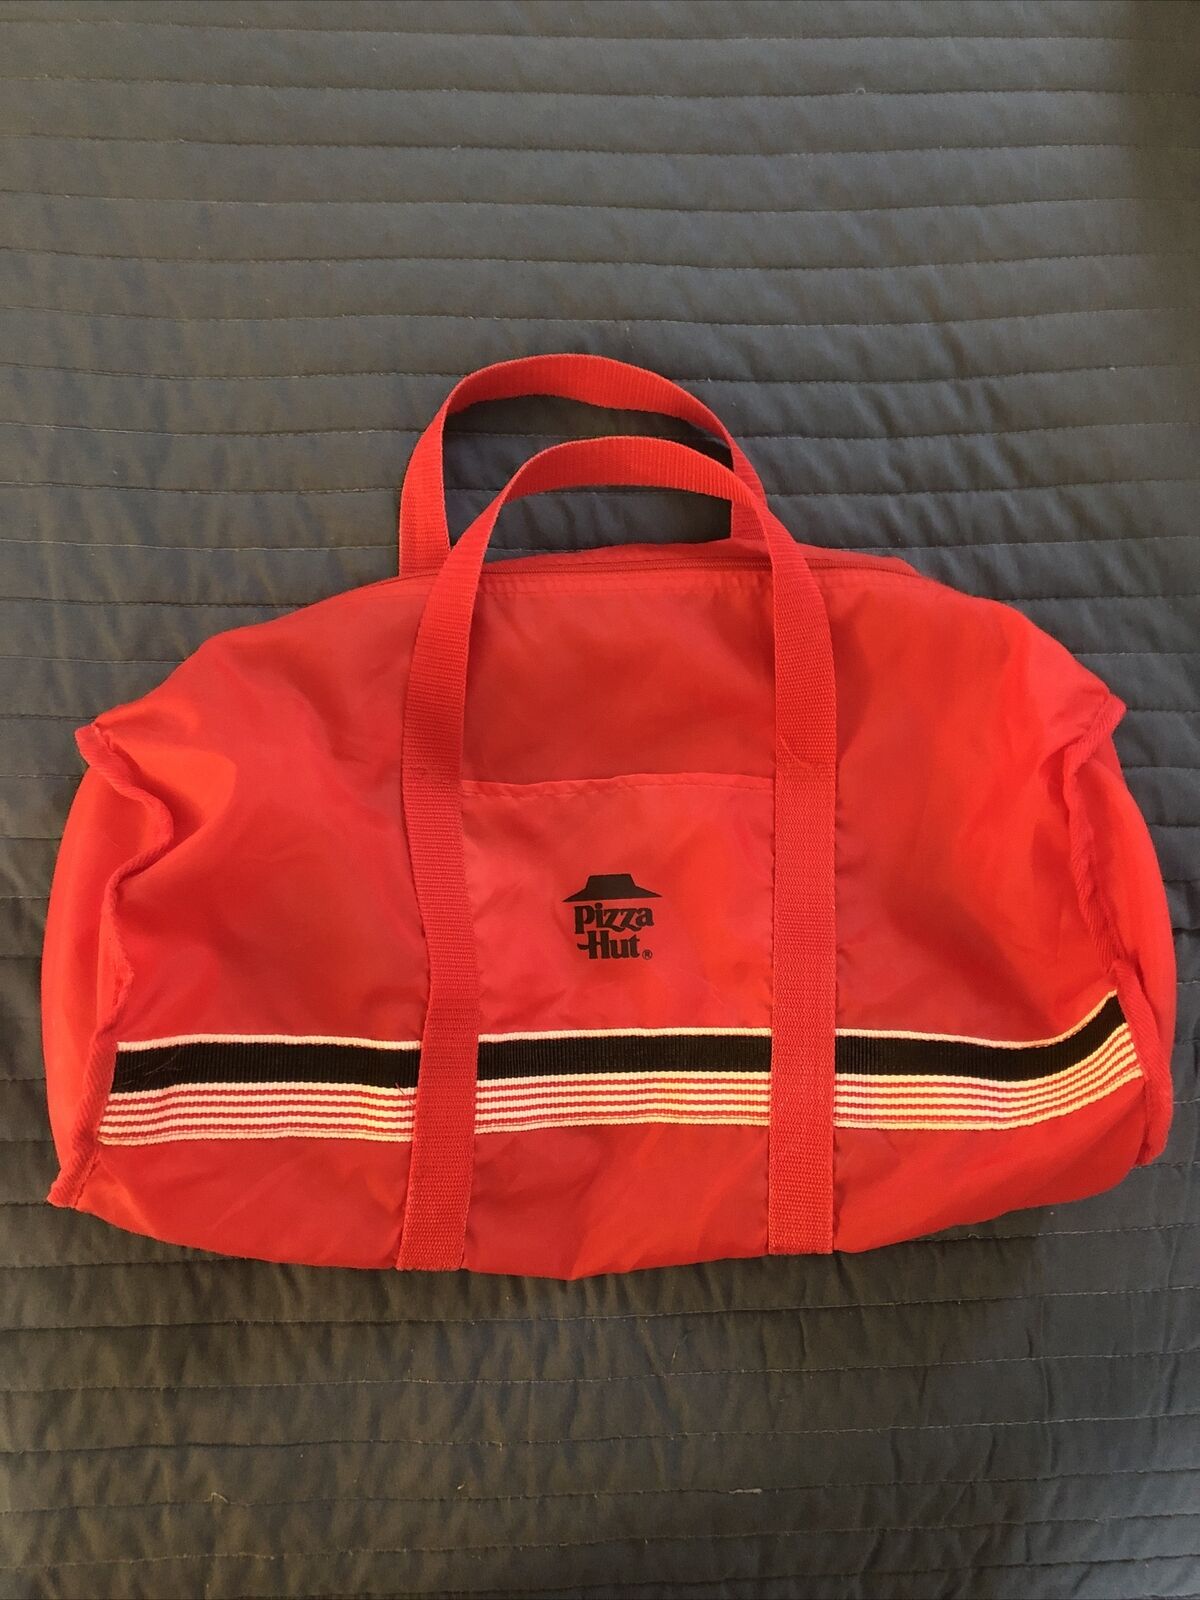 Vintage 1980s Pizza Hut Red Lightweight Nylon Duffle Tote Bag Measures 16\